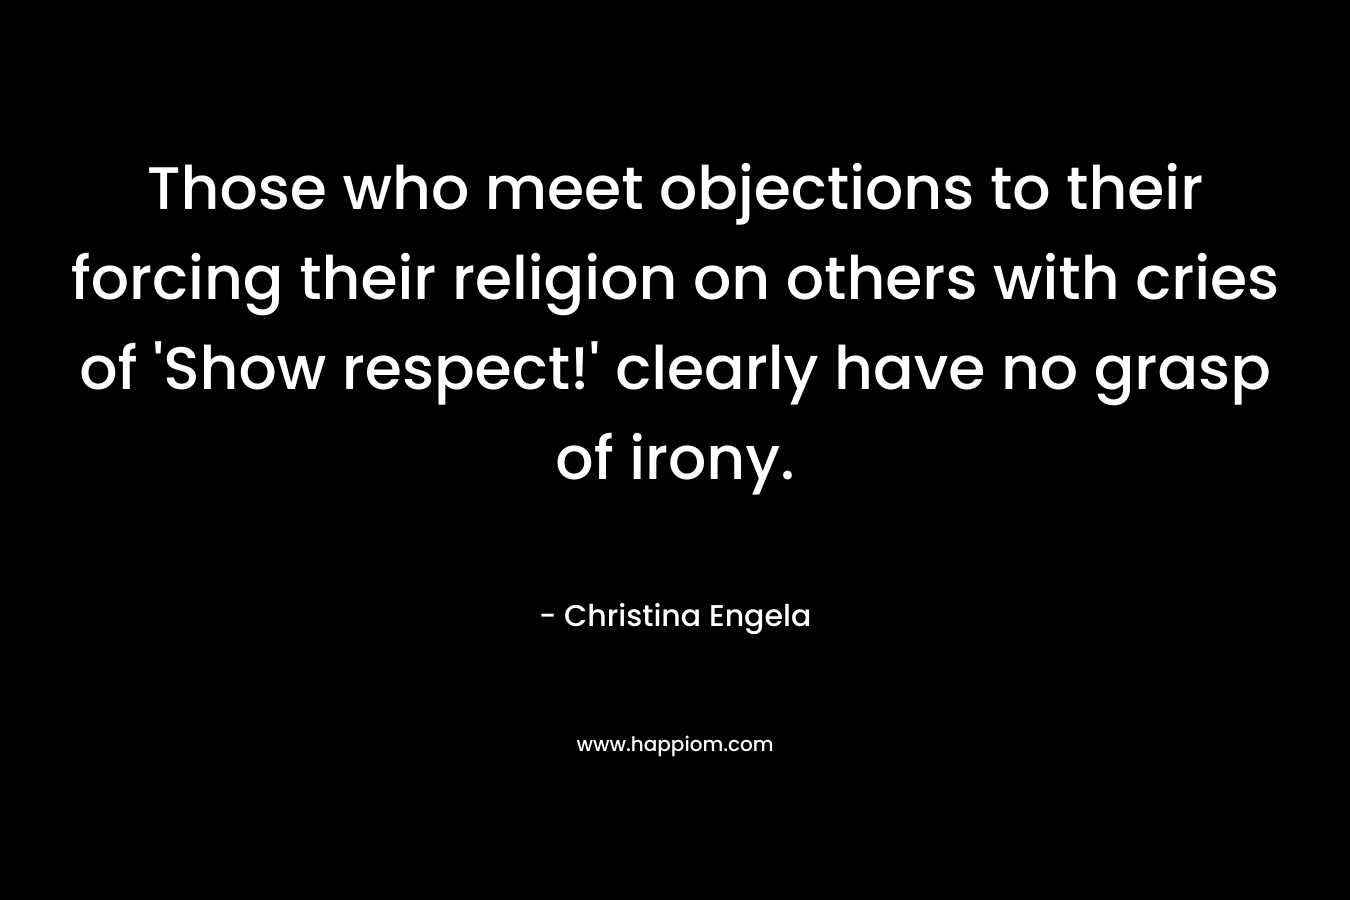 Those who meet objections to their forcing their religion on others with cries of ‘Show respect!’ clearly have no grasp of irony. – Christina Engela